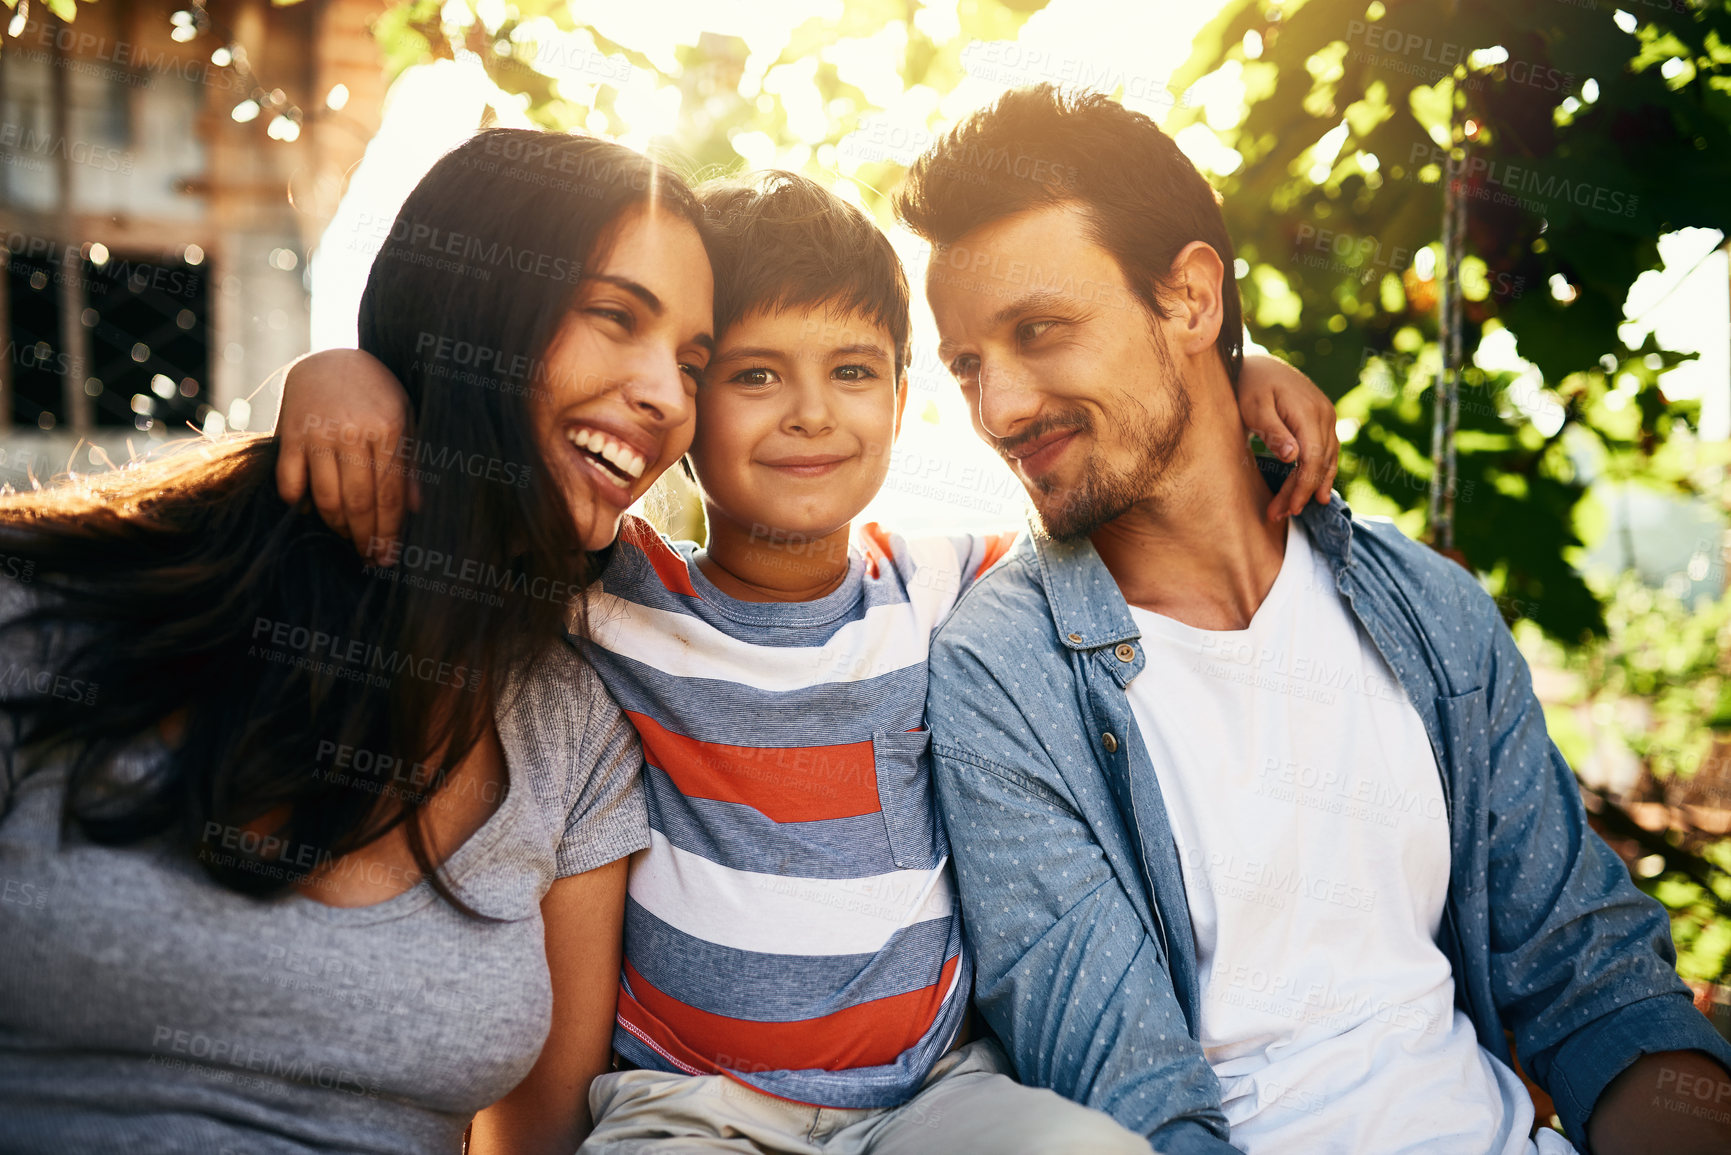 Buy stock photo Portrait of an adorable little boy bonding with his parents outdoors